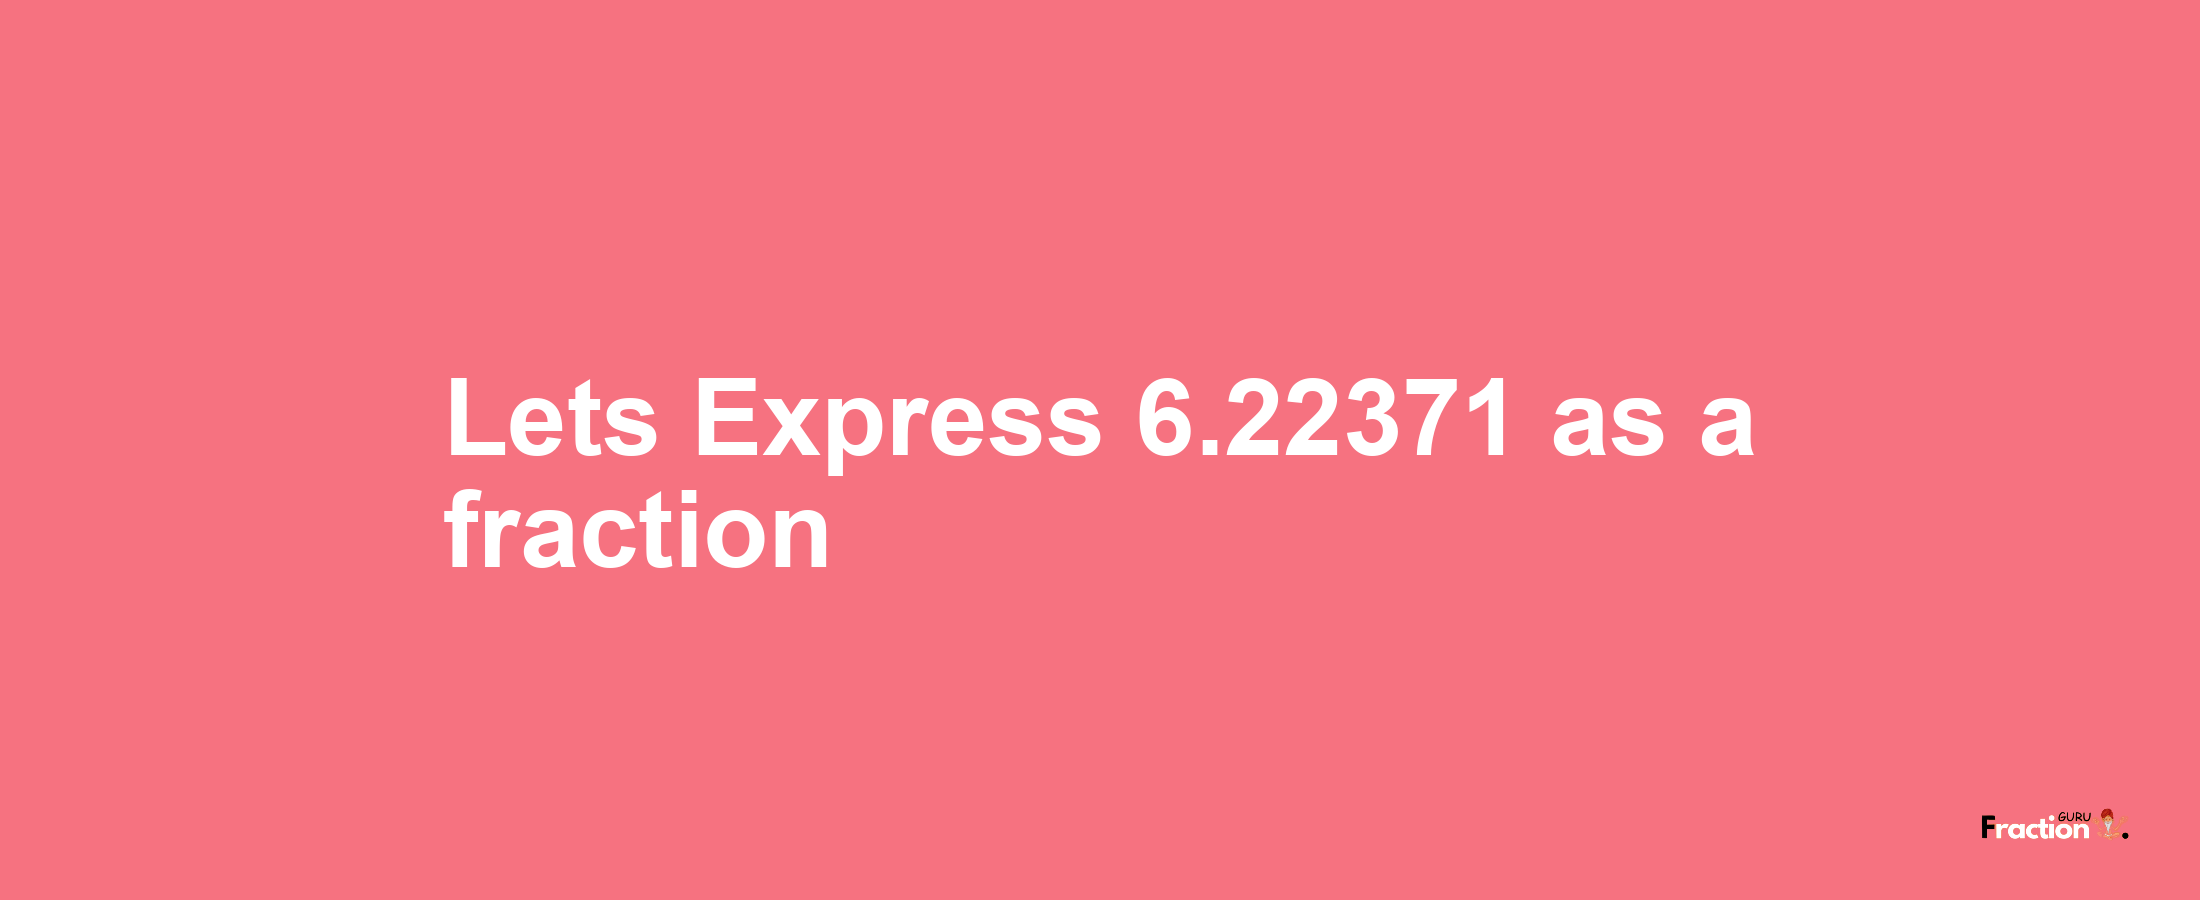 Lets Express 6.22371 as afraction